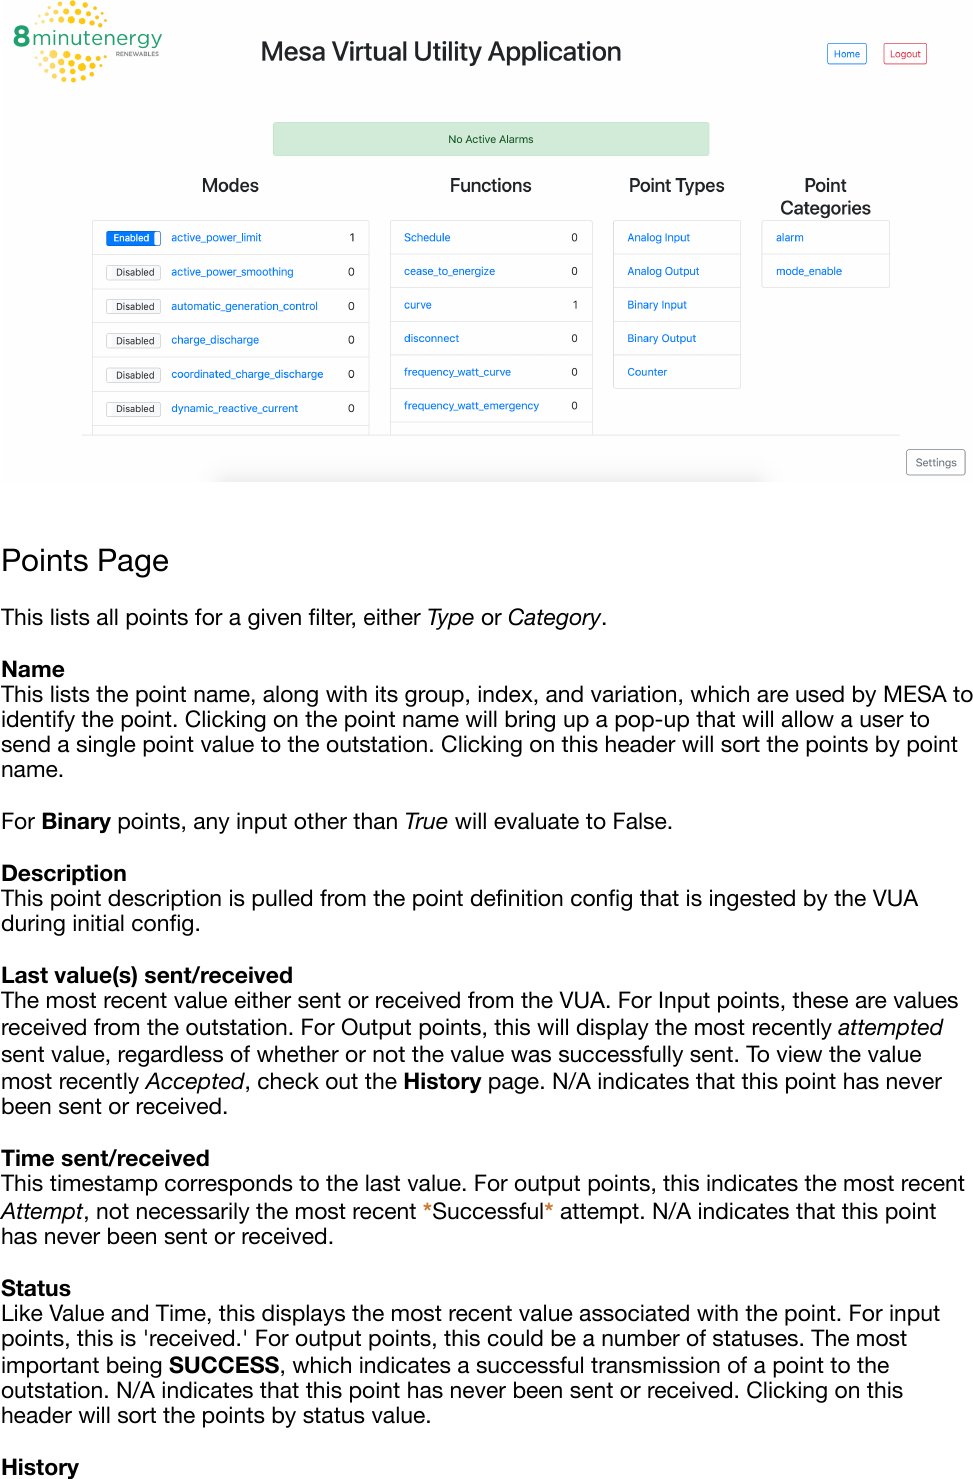 Page 3 of 7 - VUA User Guide